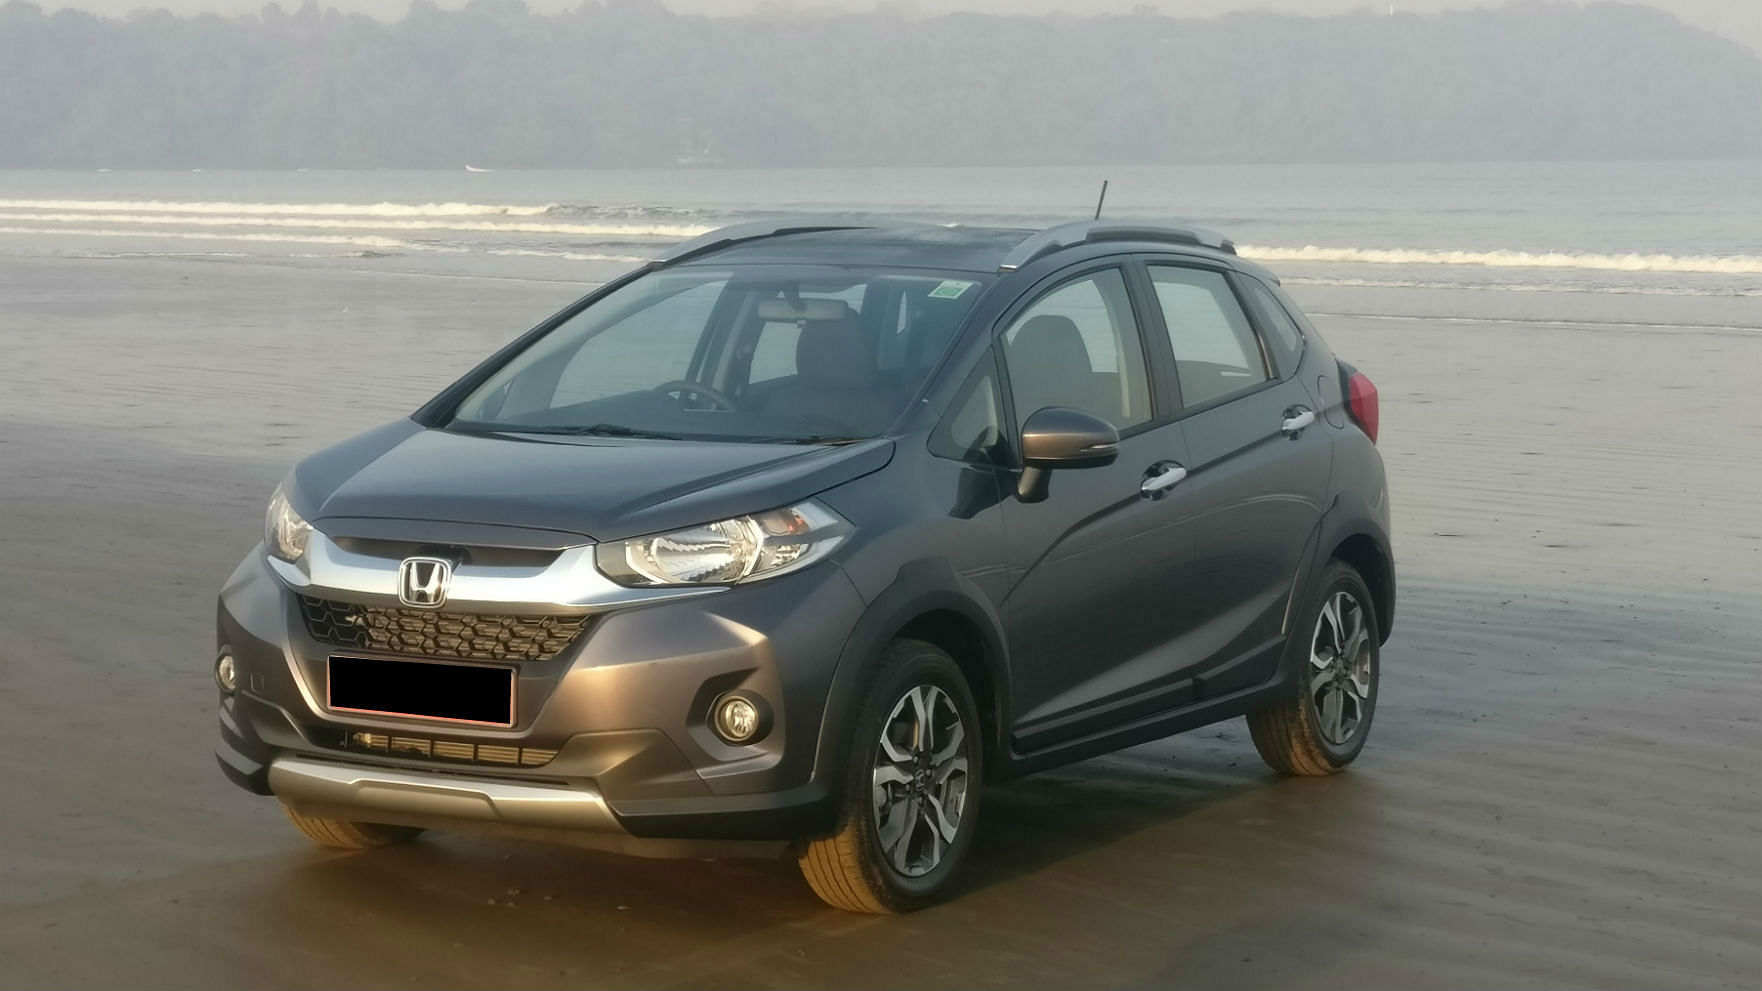 

Honda WR-V for Rs 7.75 lakh in India. (Photo: <b>The Quint</b>)